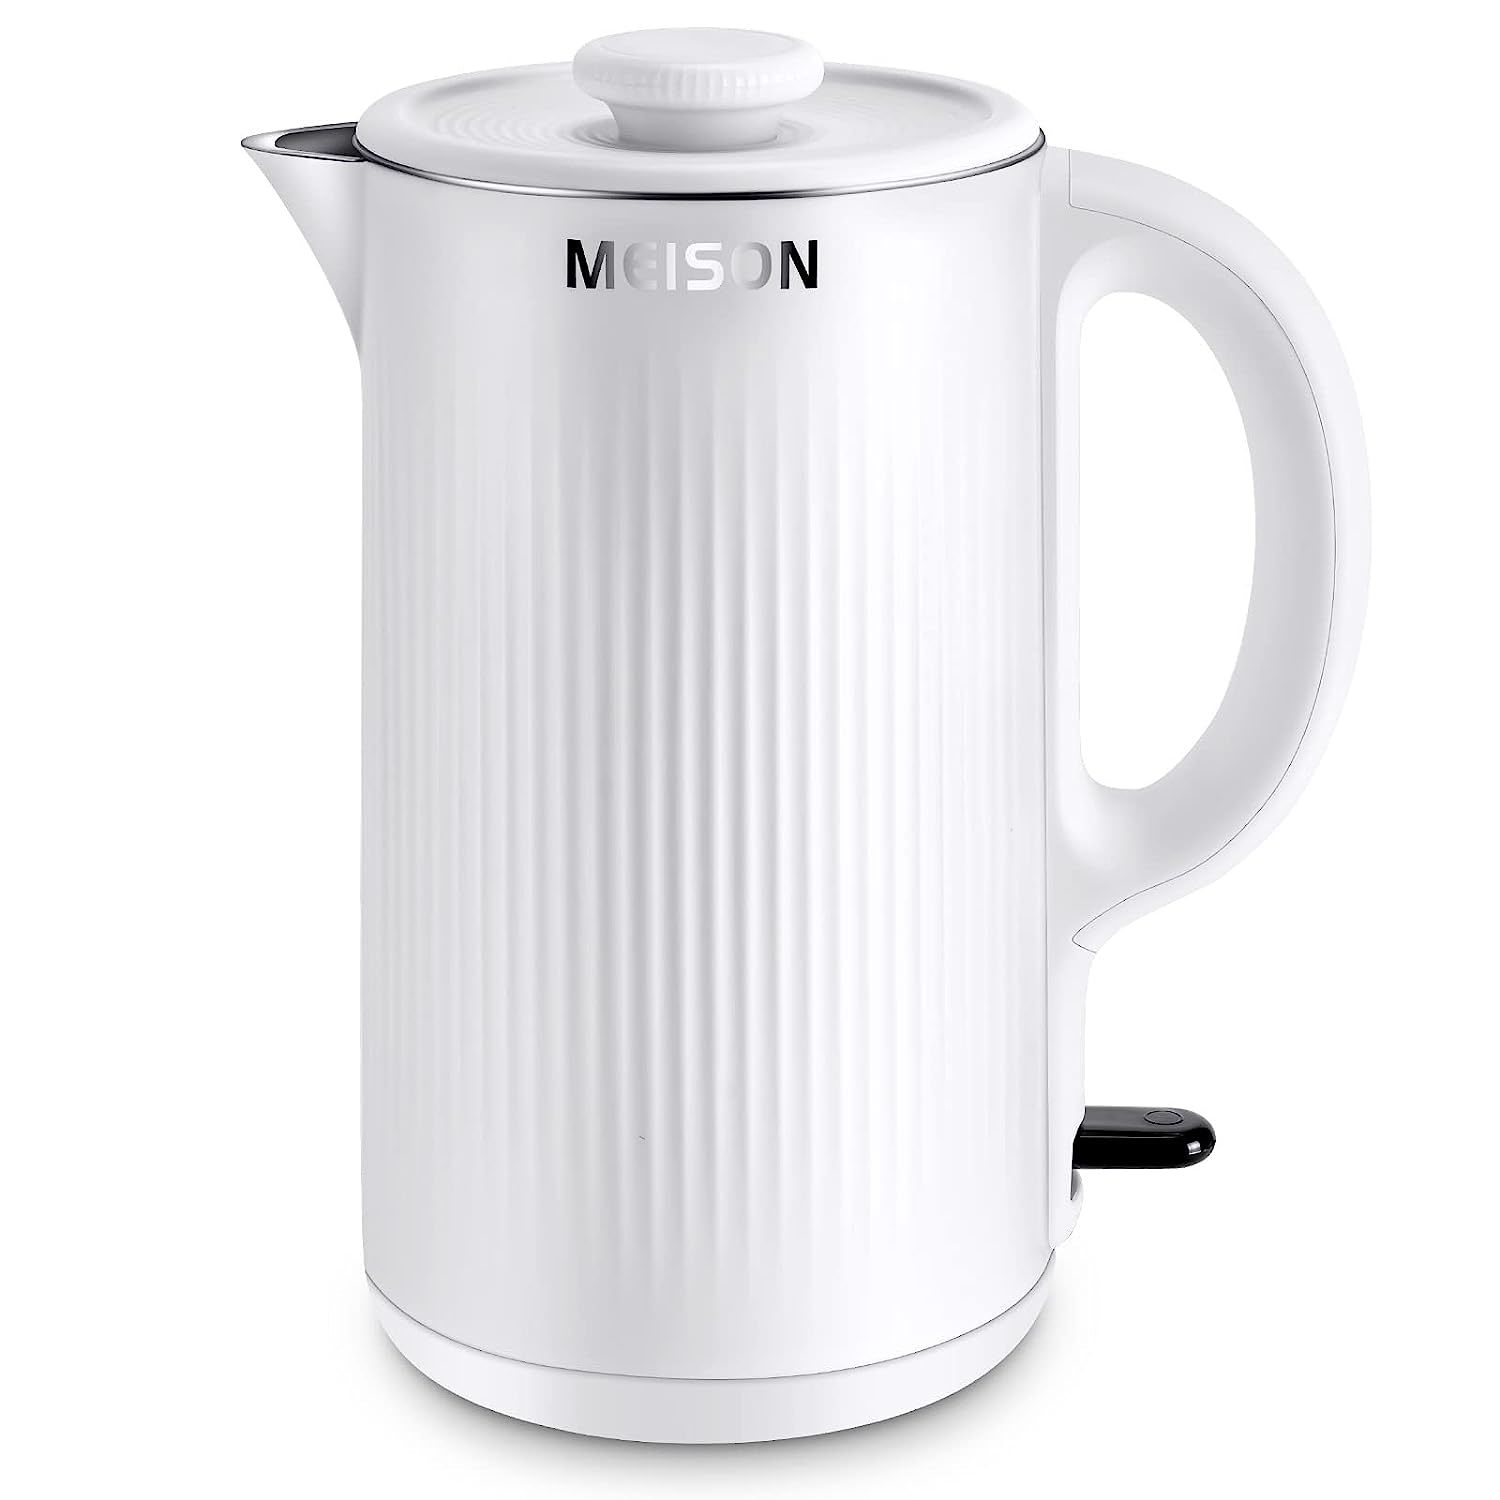 0.6L Small Electric Kettles Stainless Steel, Travel Mini Hot Water Boiler Heater, Double Wall Cool Touch Portable Teapot, Auto Shut-Off & Boil-Dry